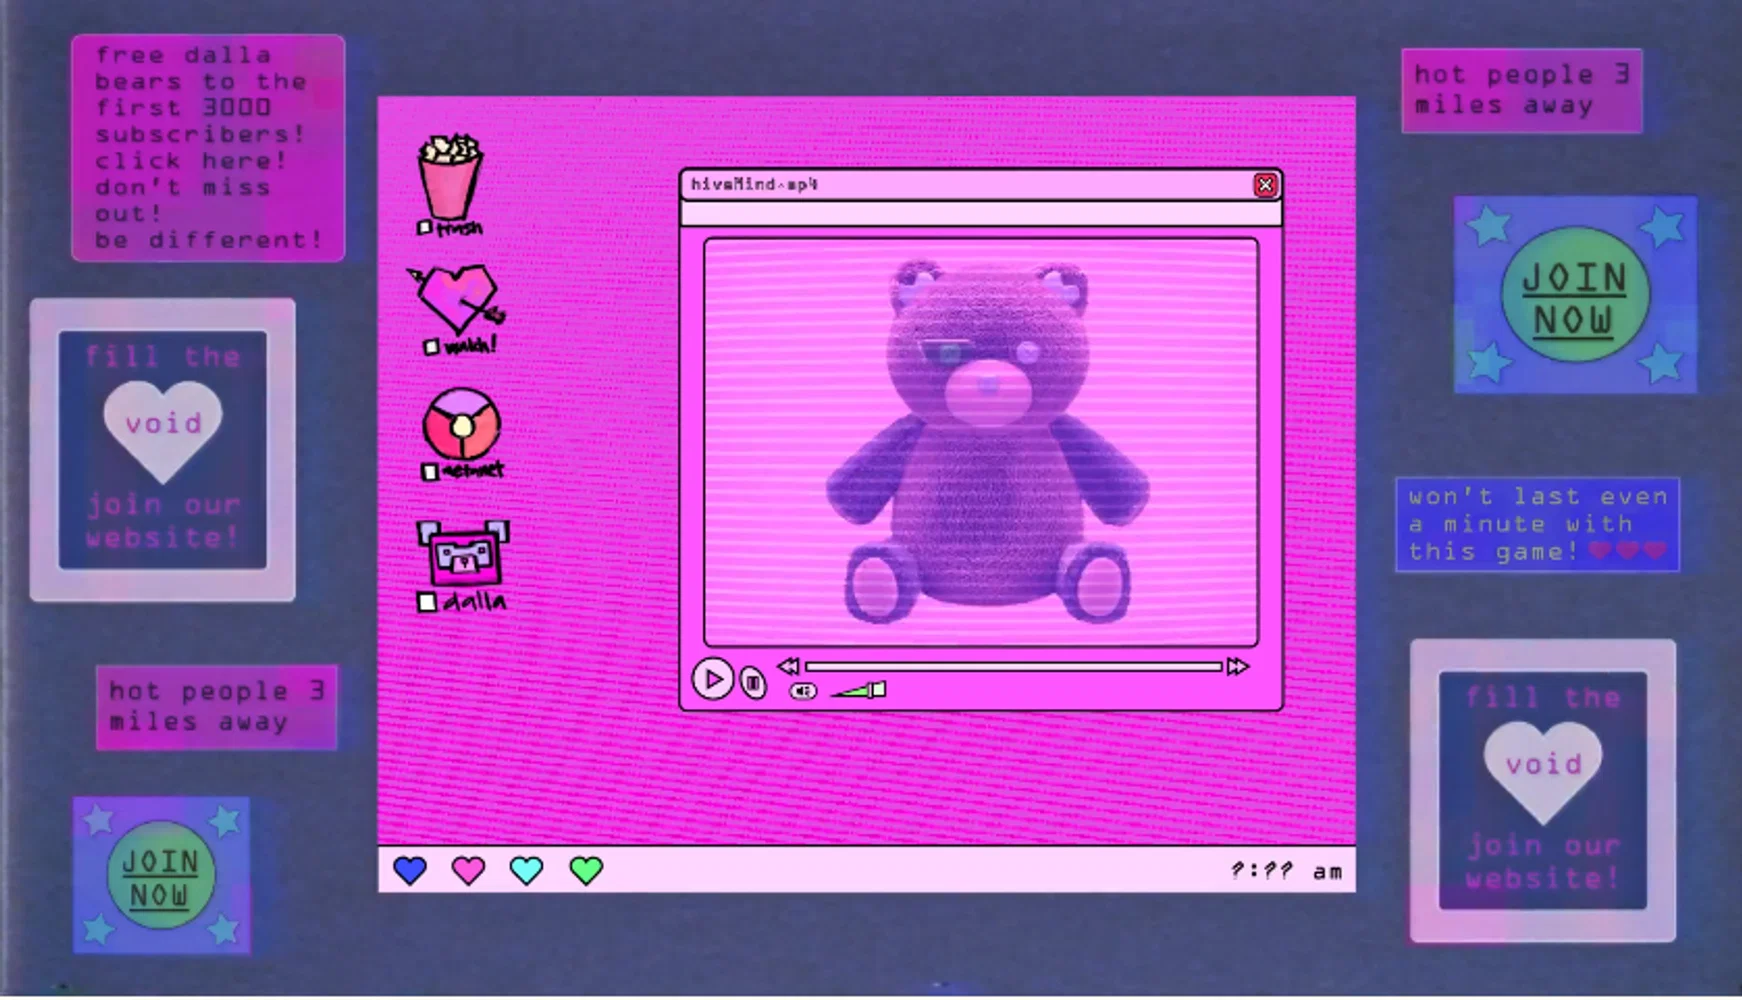 y2k aesthetic, 3D Futuristic Bear, ironic popup messages